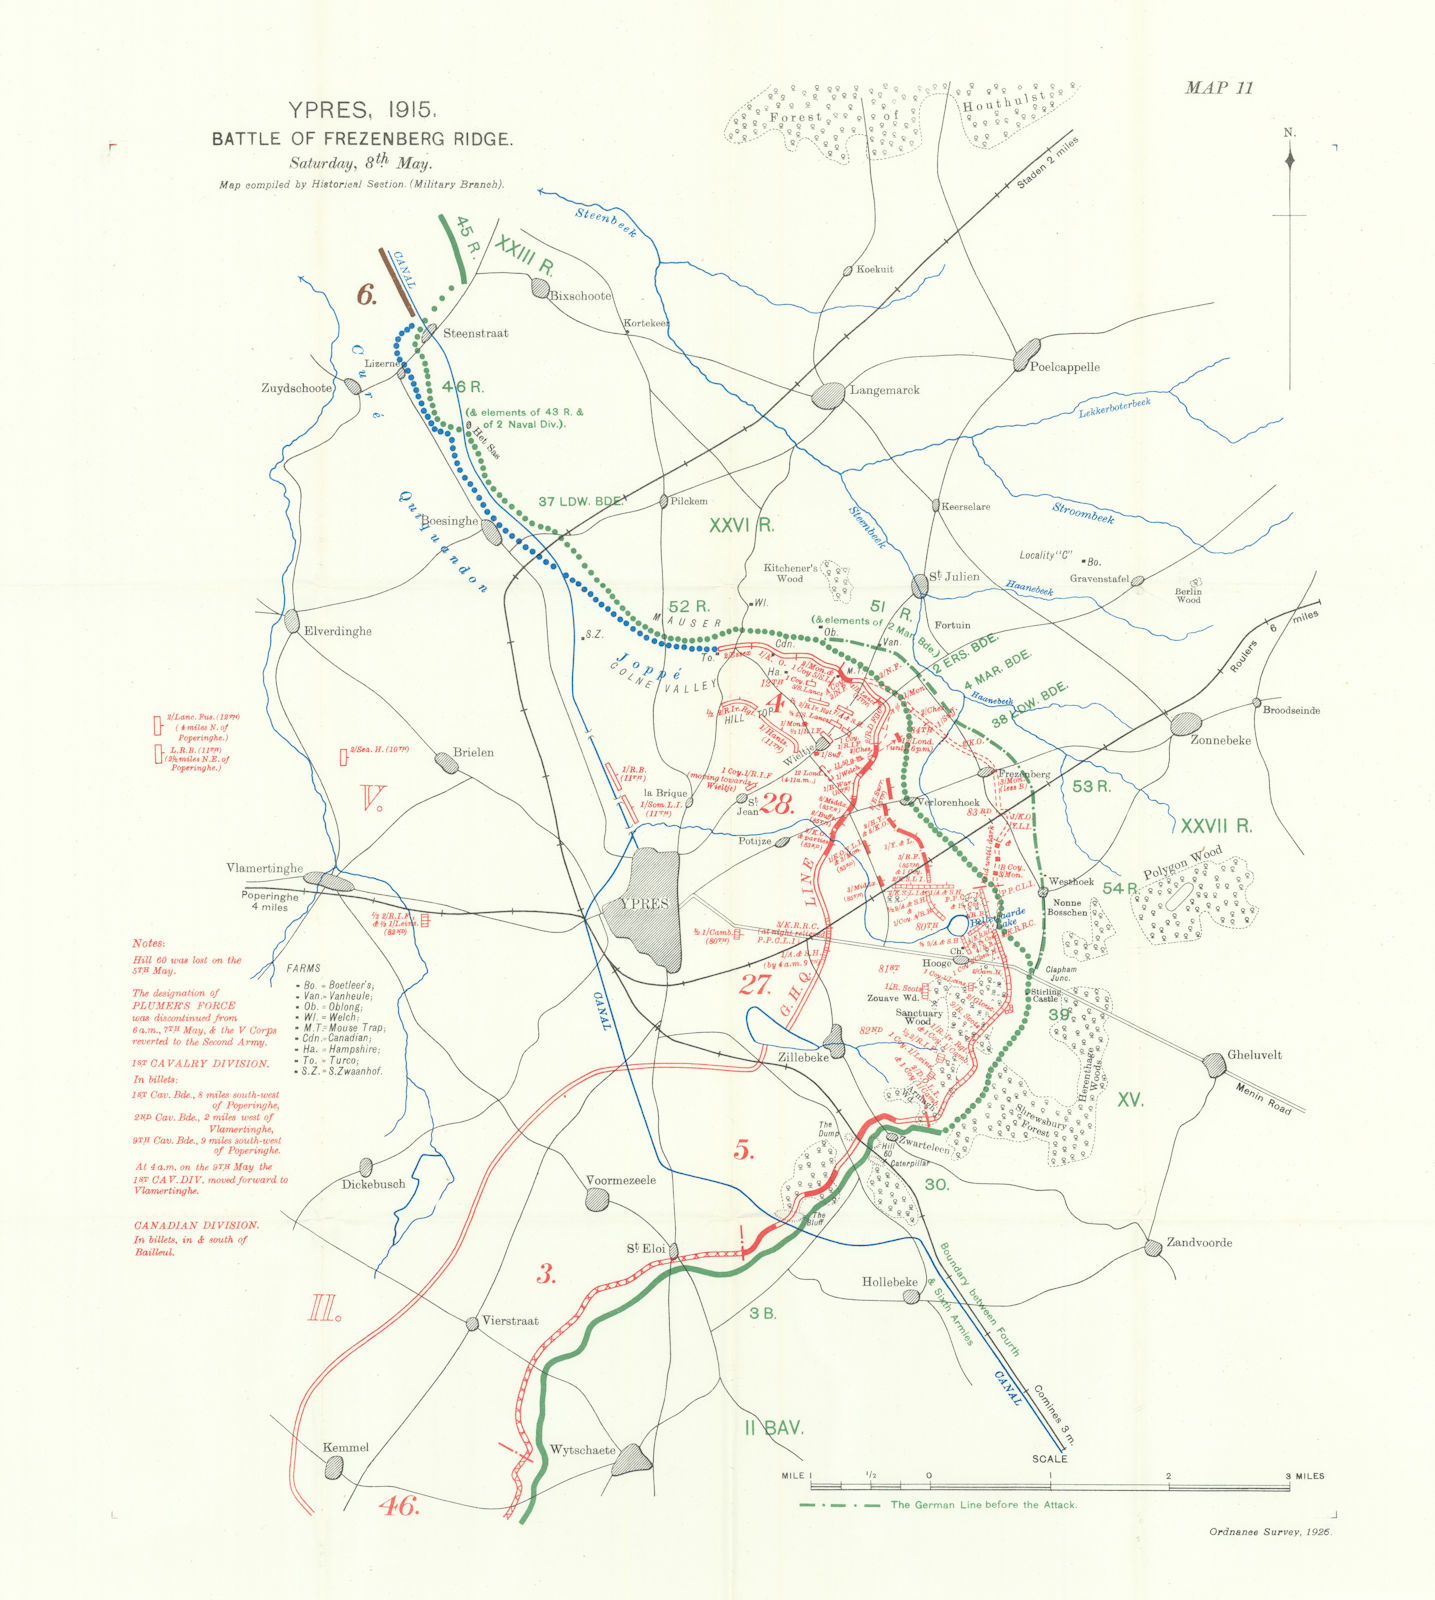 Ypres. Battle of Frezenberg Ridge, 8th May 1915. First World War. 1928 old map